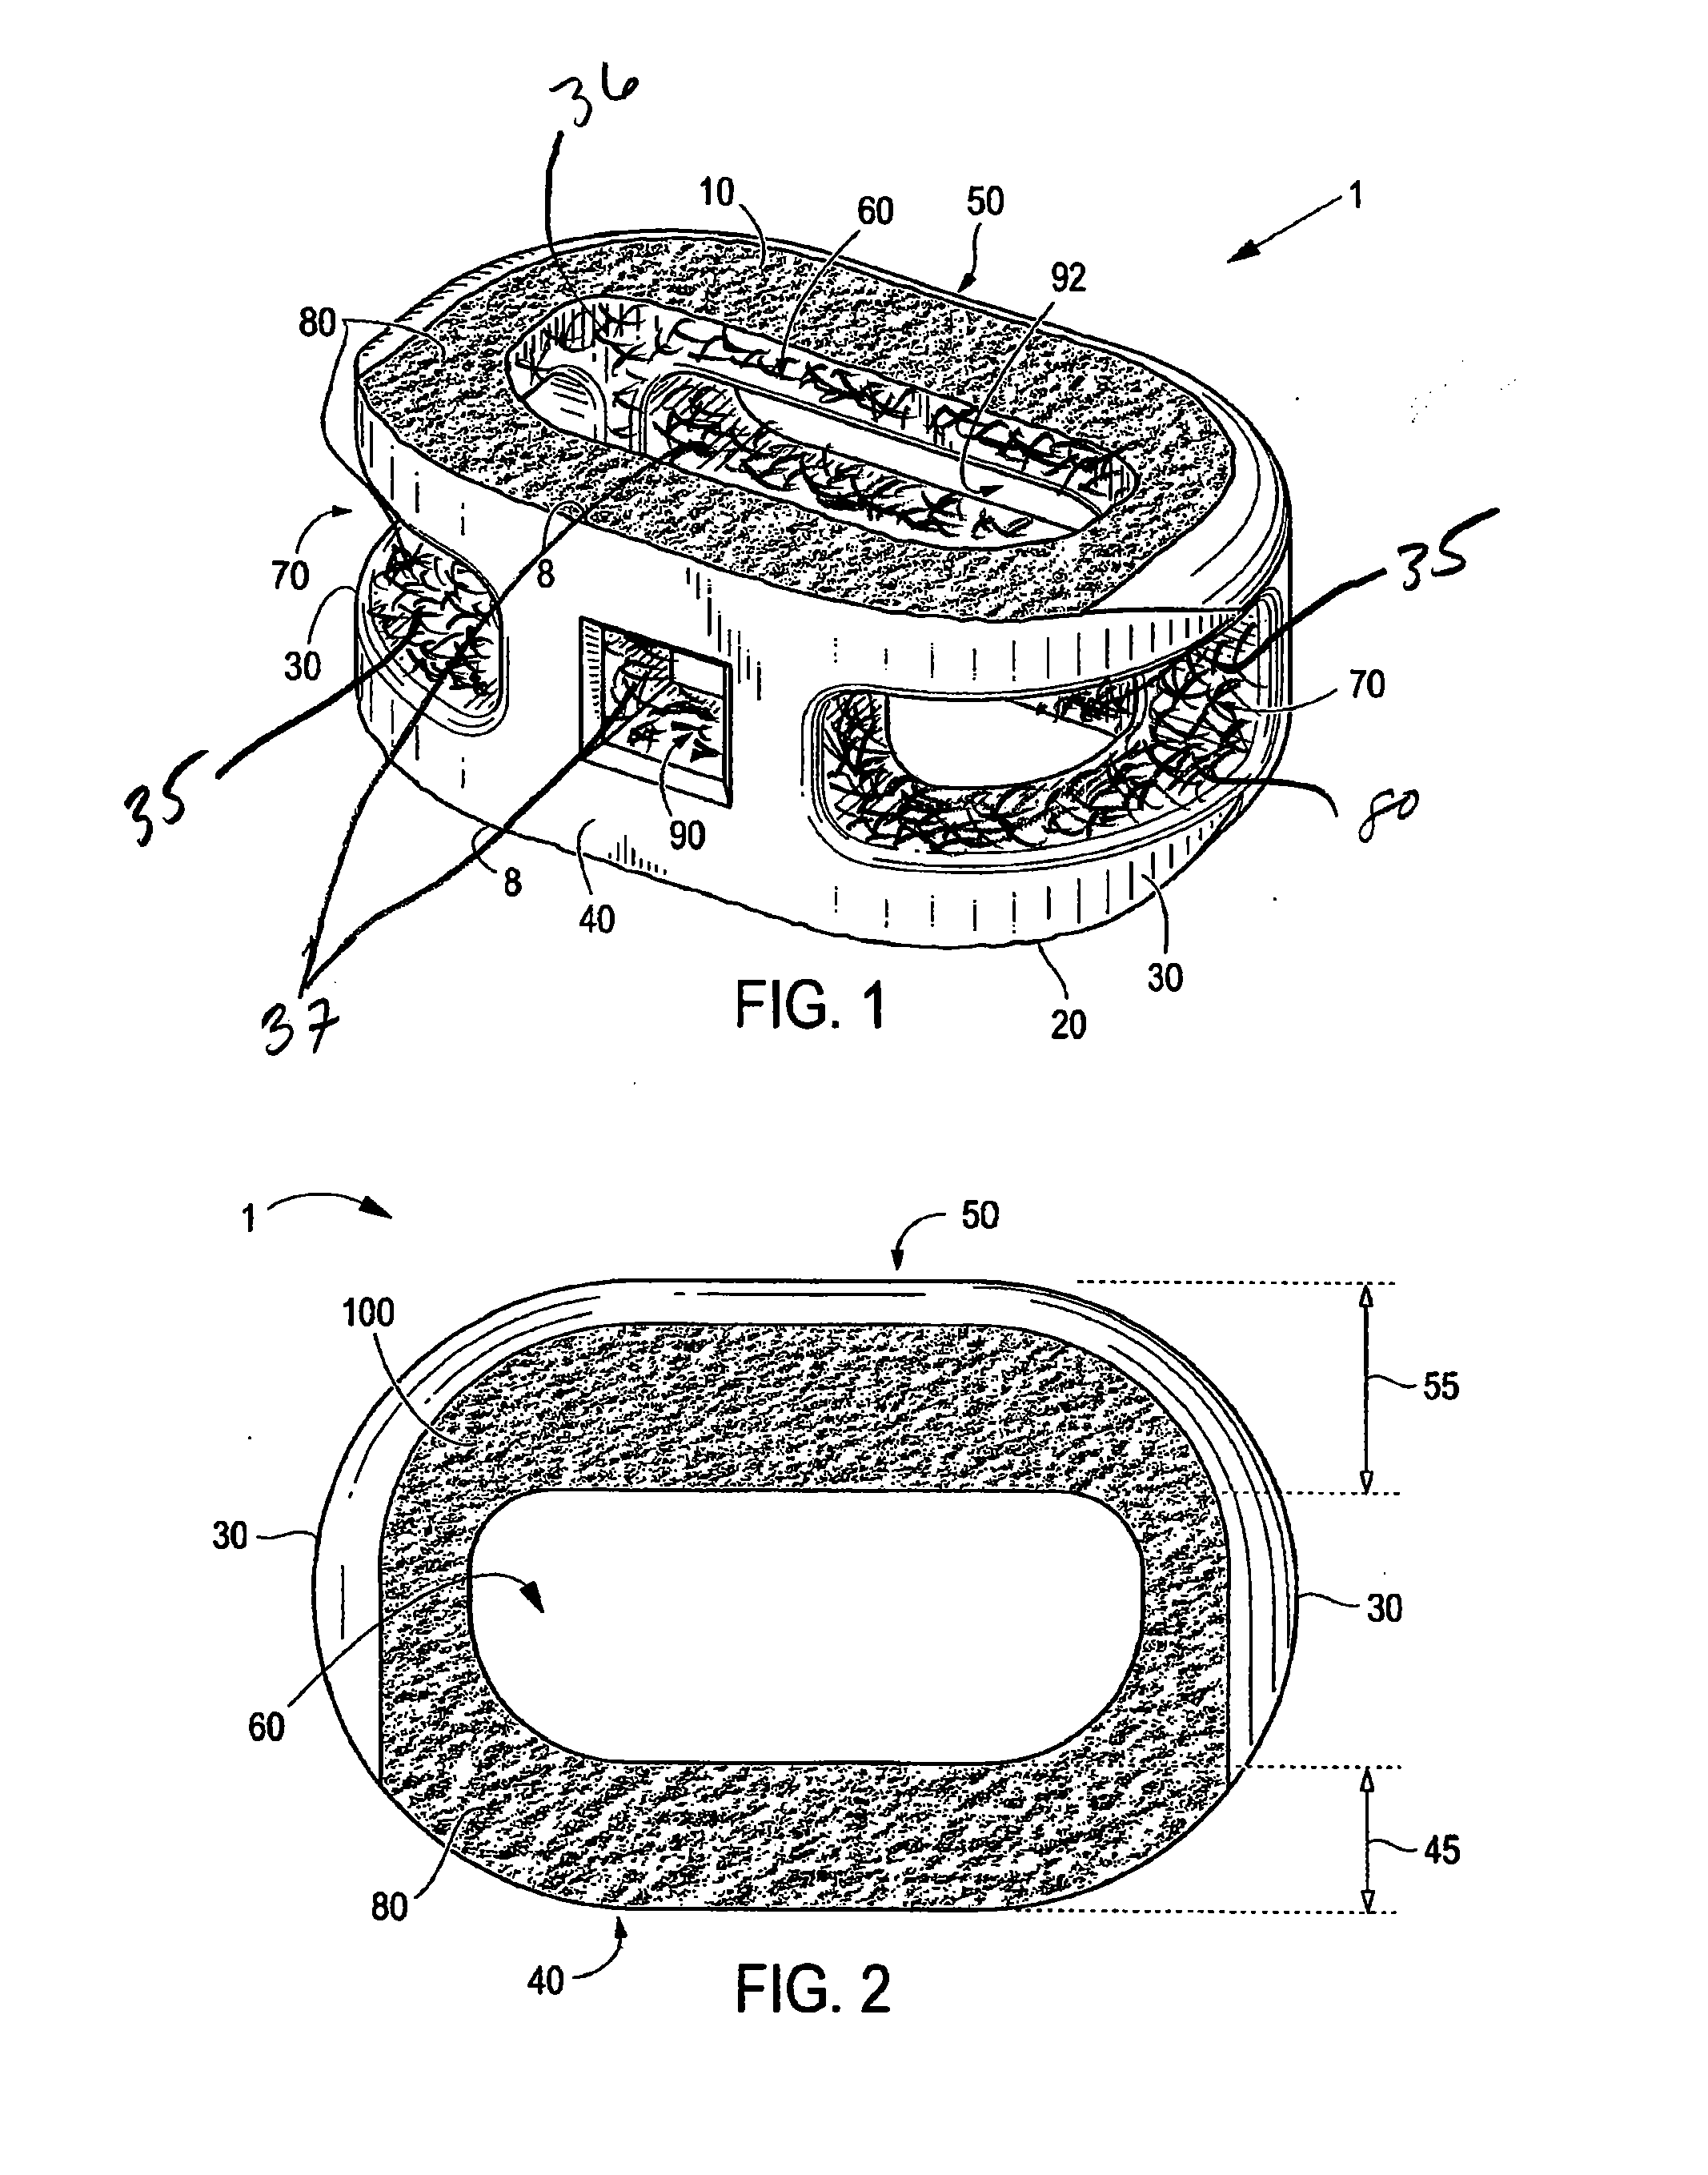 Interbody Spinal Implant Having Internally Textured Surfaces